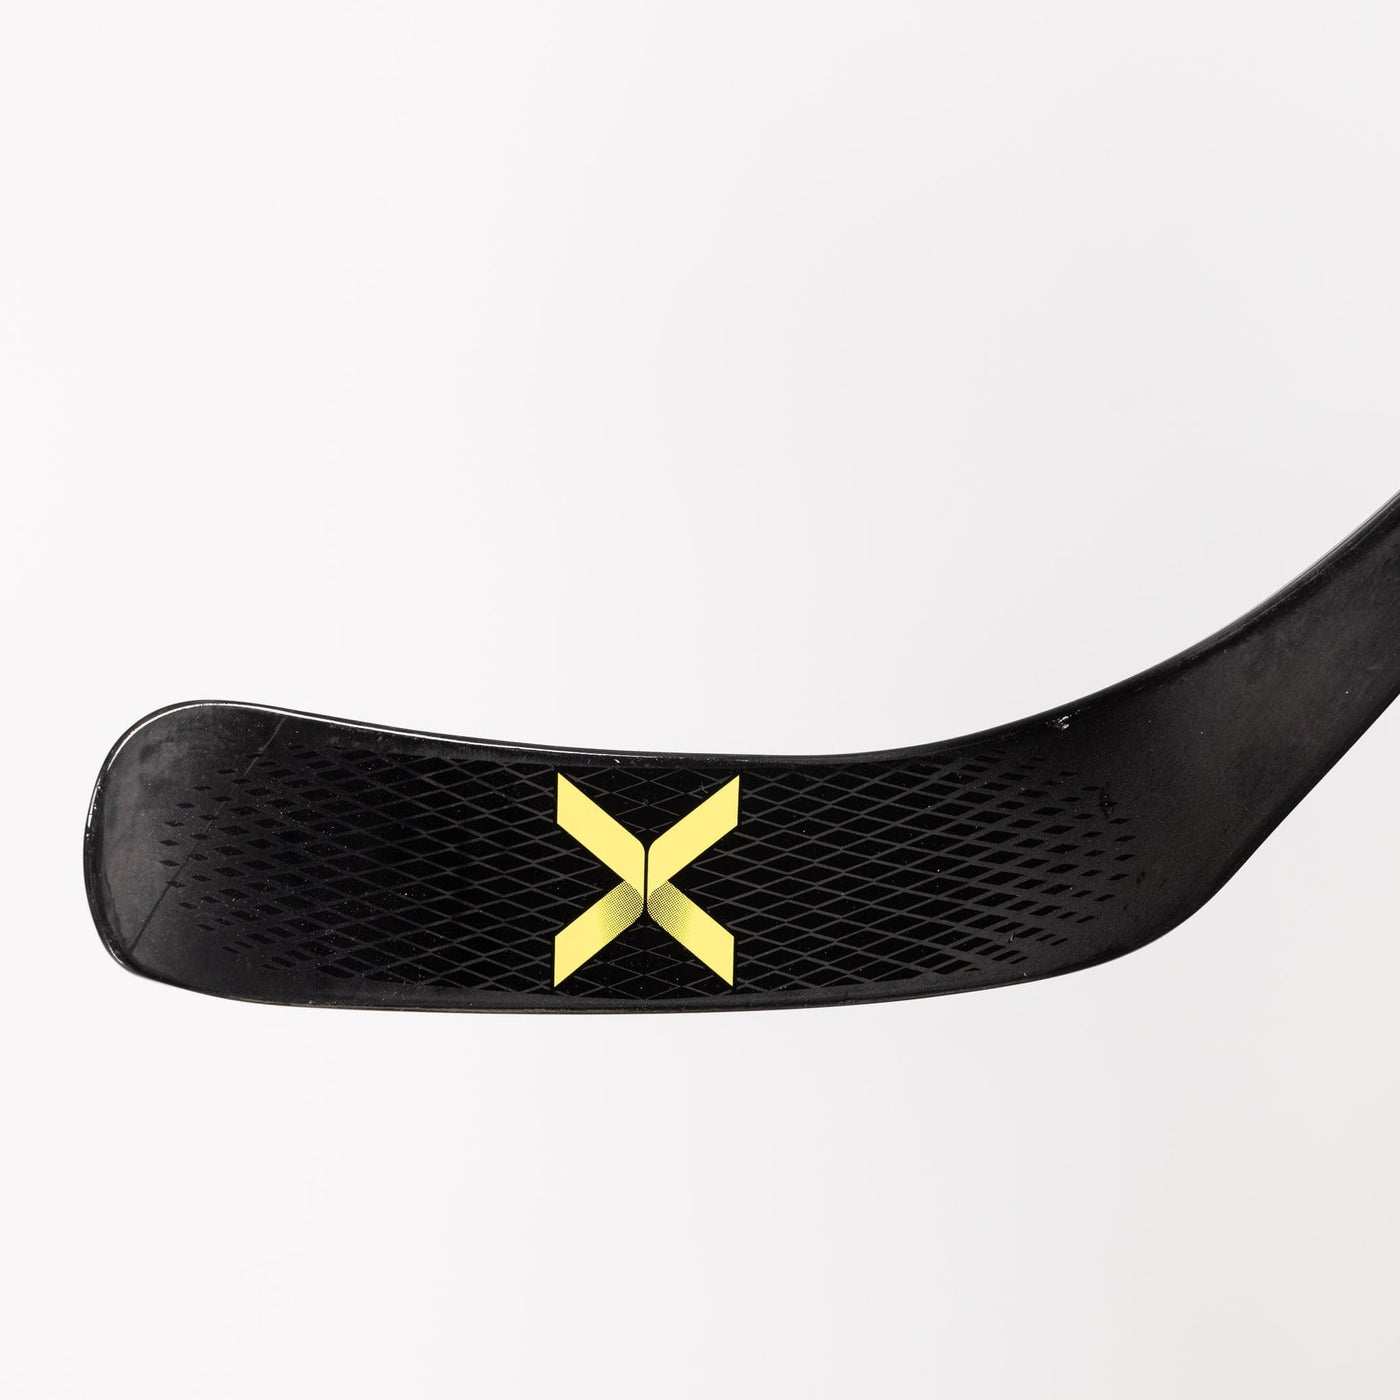 Bauer Vapor Youth Hockey Stick - The Hockey Shop Source For Sports